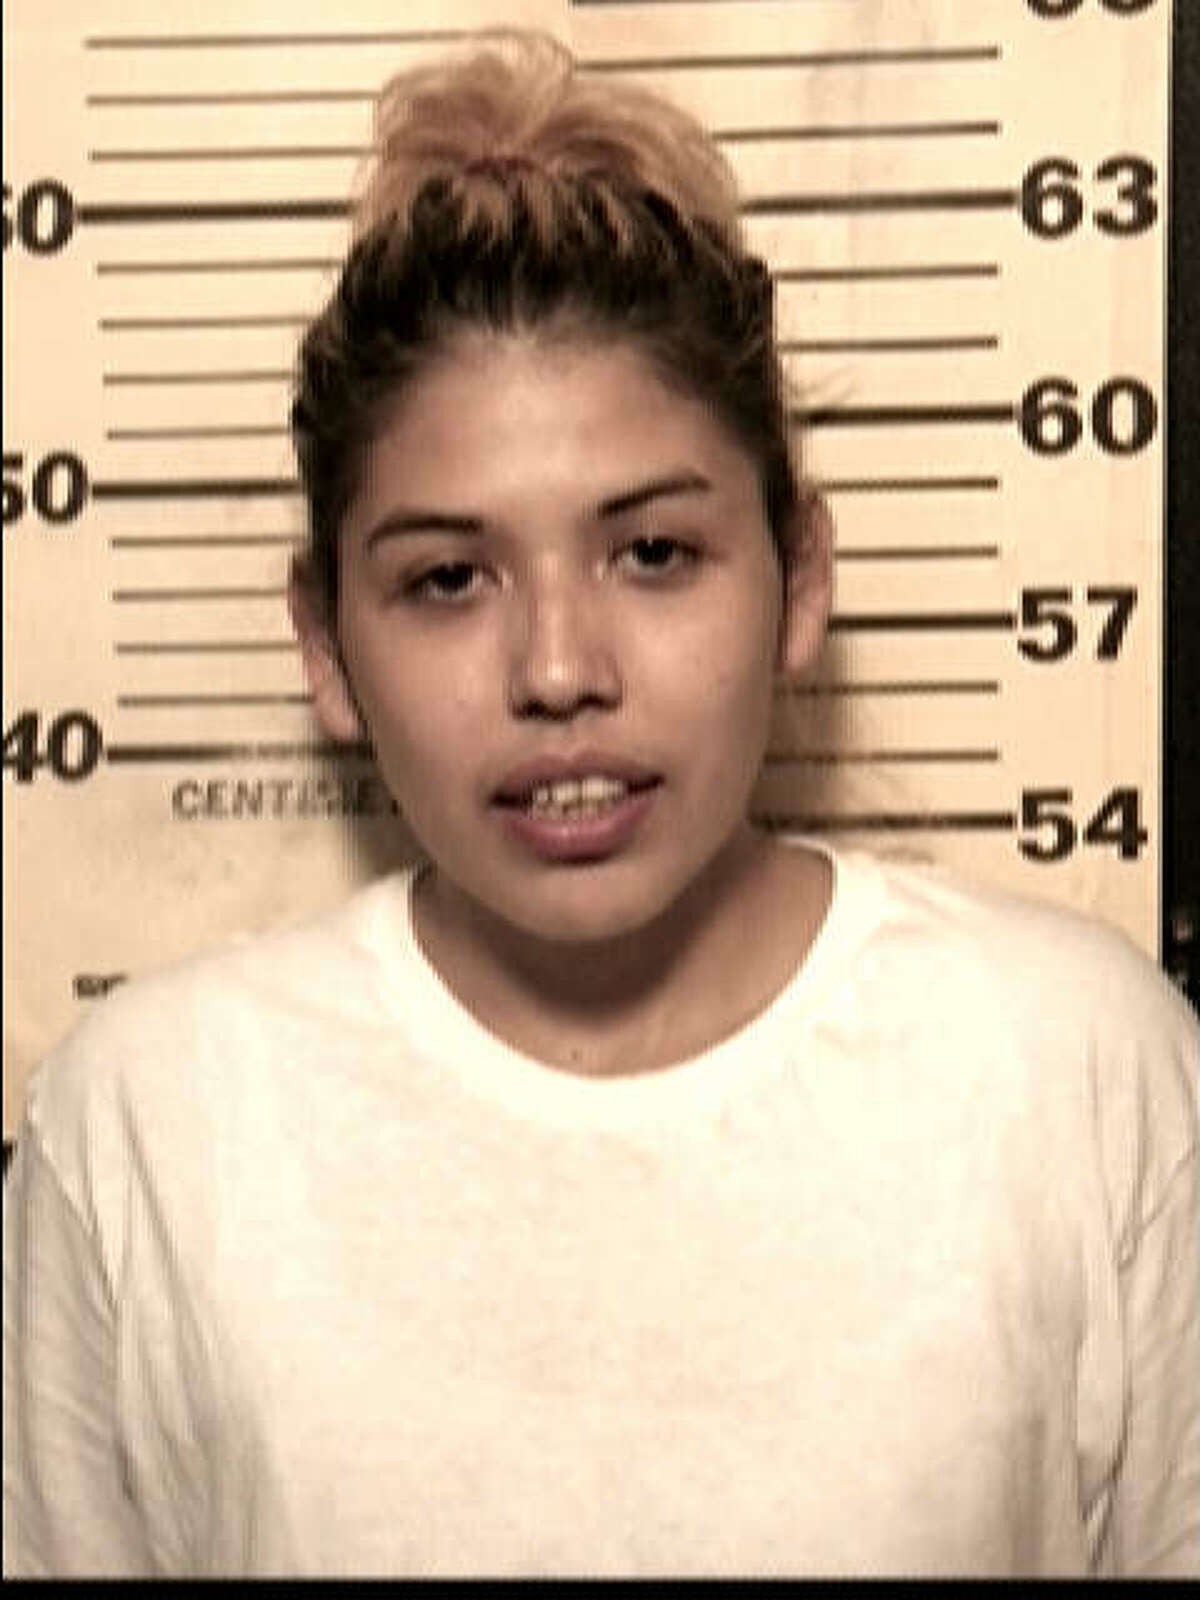 Mercedes Salazar, seen in this booking photo from 2005, is currently wanted on an aggravated kidnapping charge. She has been booked into the Bexar County Jail 11 times on 43 different charges since she was 17, according to the Sheriff's Office.